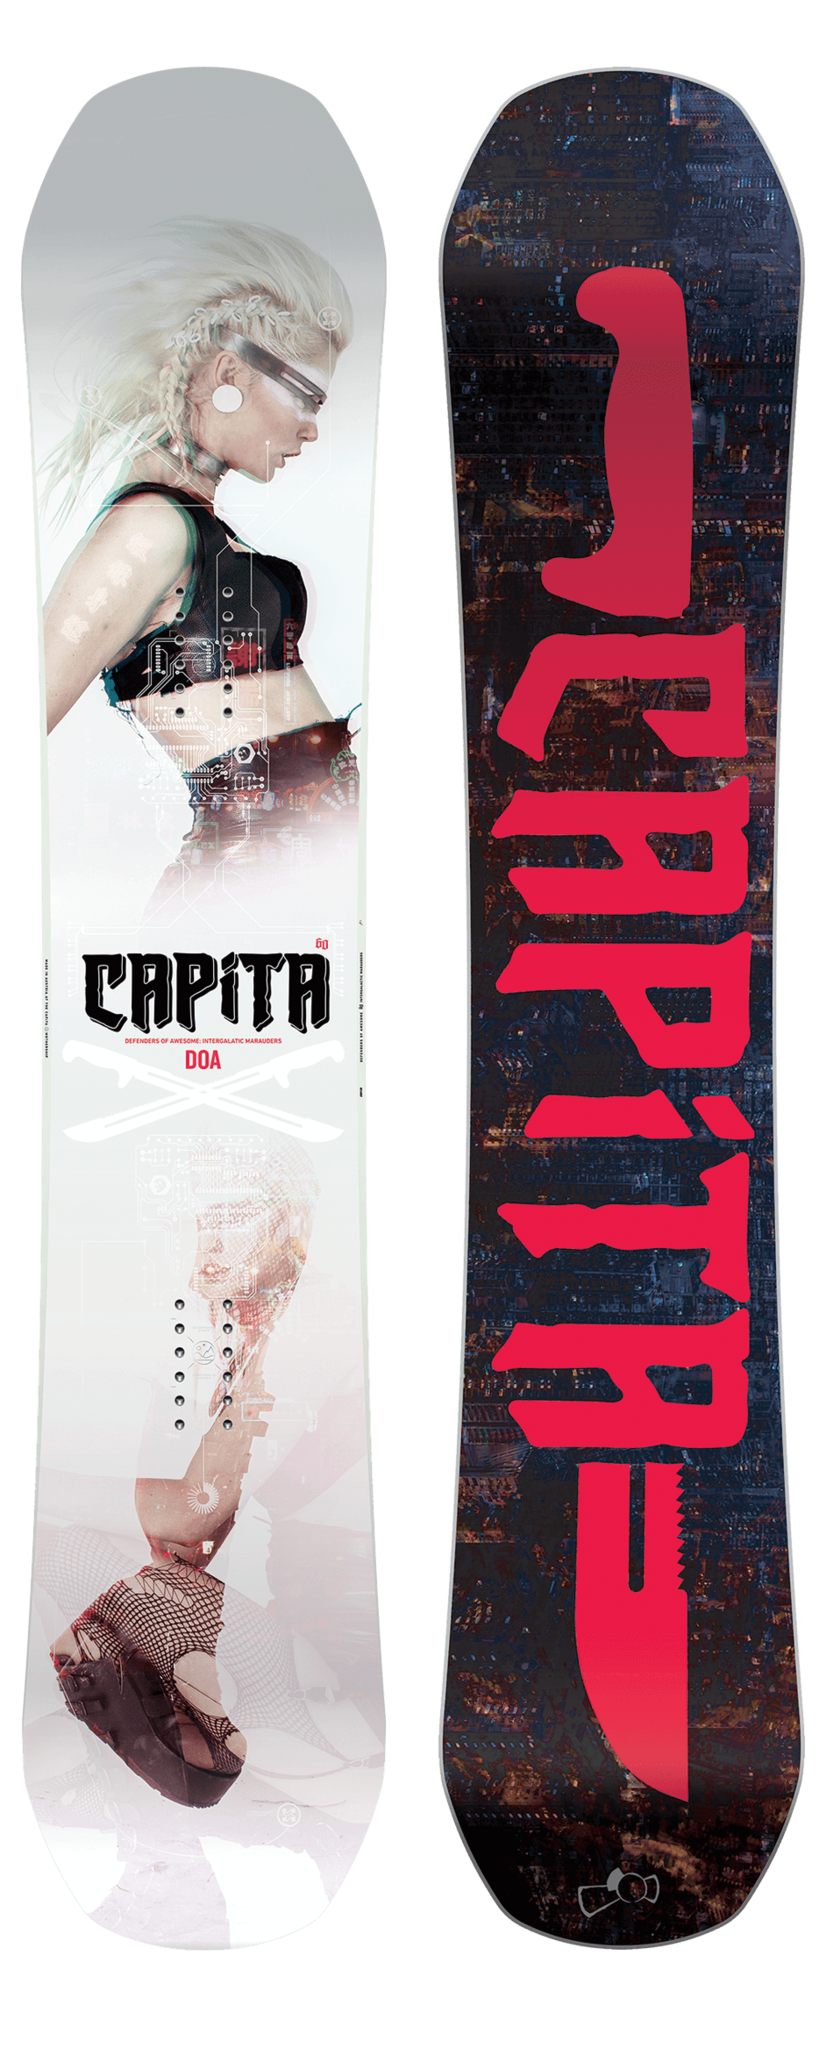 Capita Snowboards and the DOA at 88 Gear